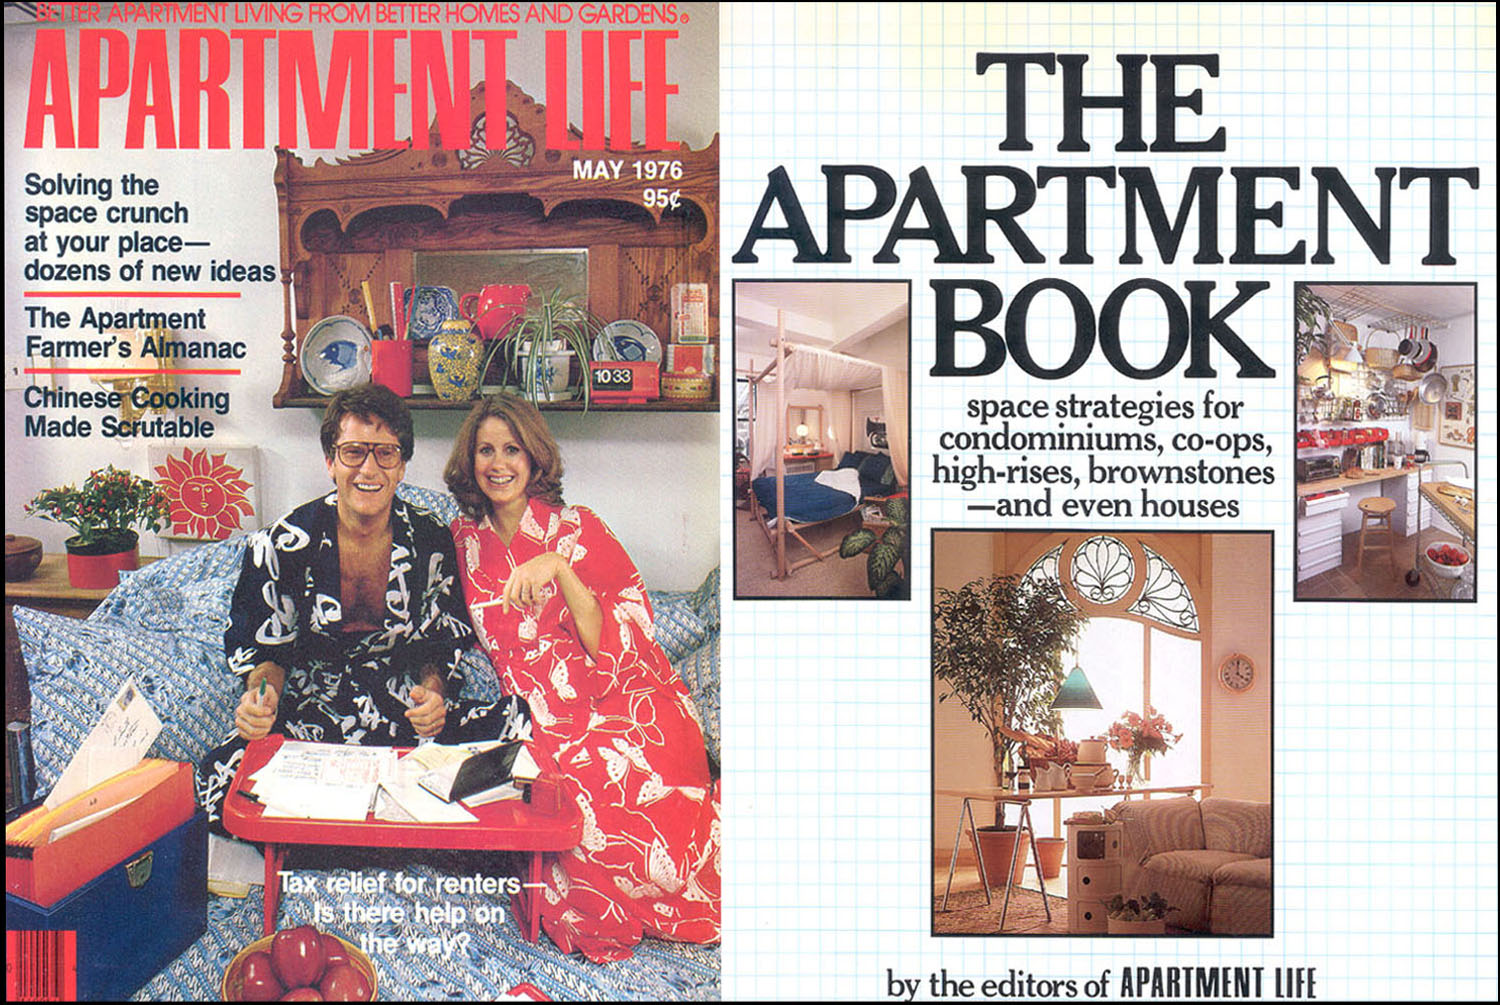 Apartment Life (5/76) & The Apartment Book (1979) Covers